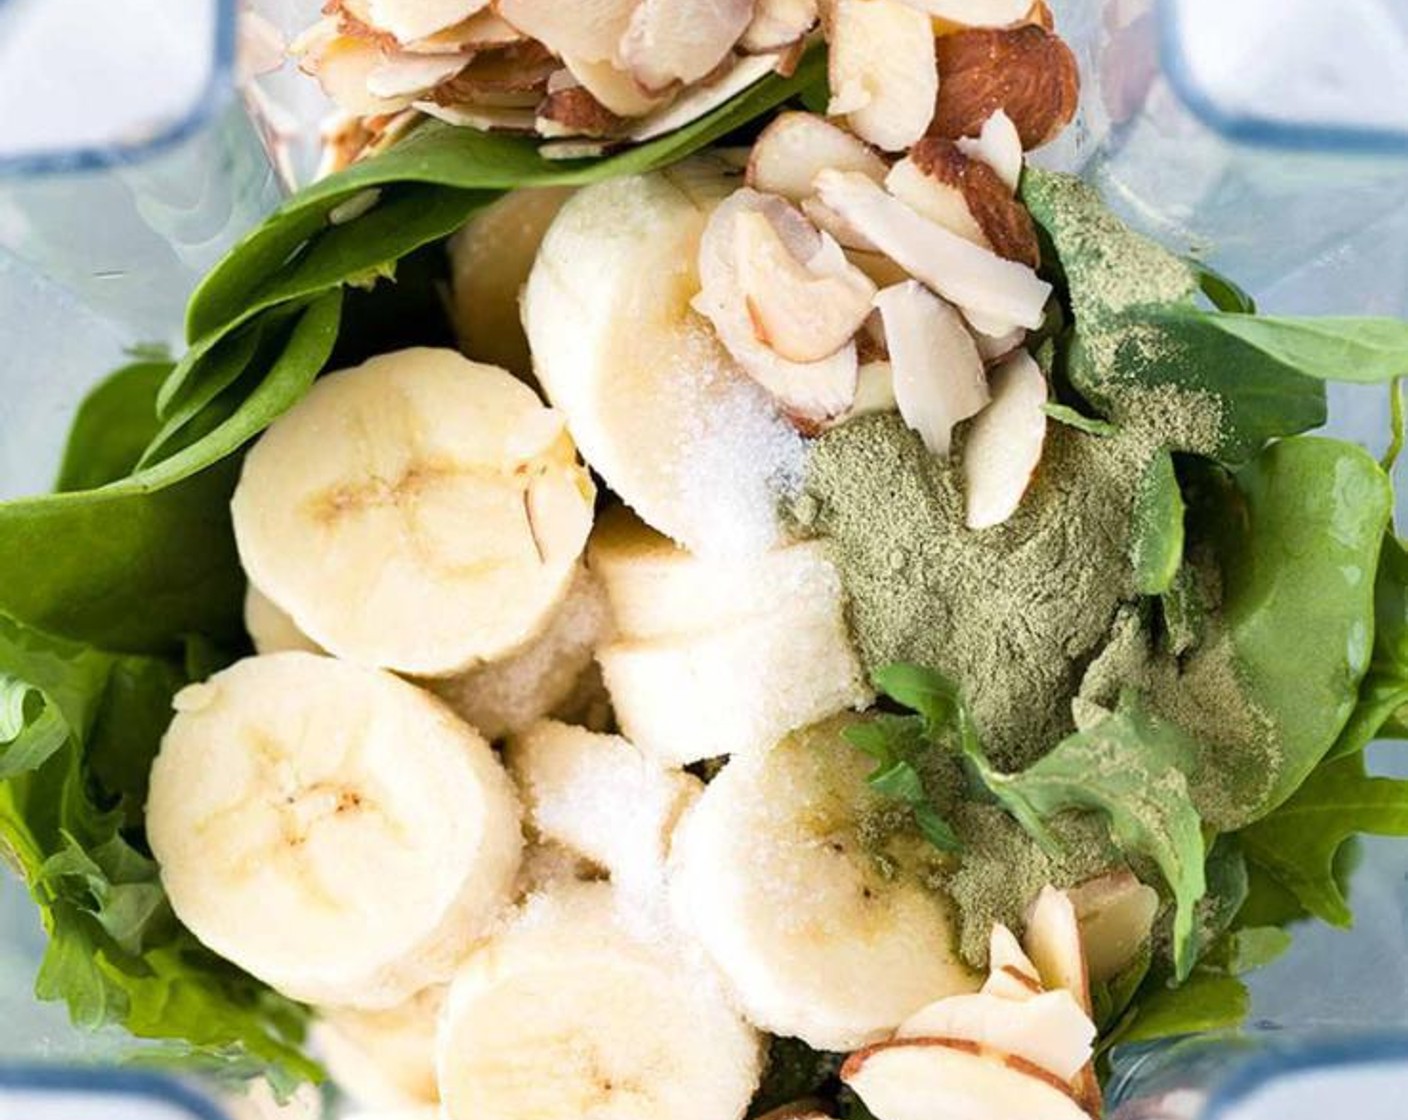 step 1 Add Ice (2 cups), Unsweetened Almond Milk (1 cup), Nonfat Plain Greek Yogurt (1/2 cup), Baby Kale (1 cup), Fresh Baby Spinach (1 cup), Banana (1), Sliced Almonds (1/4 cup), Matcha Powder (1 Tbsp), and Natural Sweetener (1/2 Tbsp) to the blender.